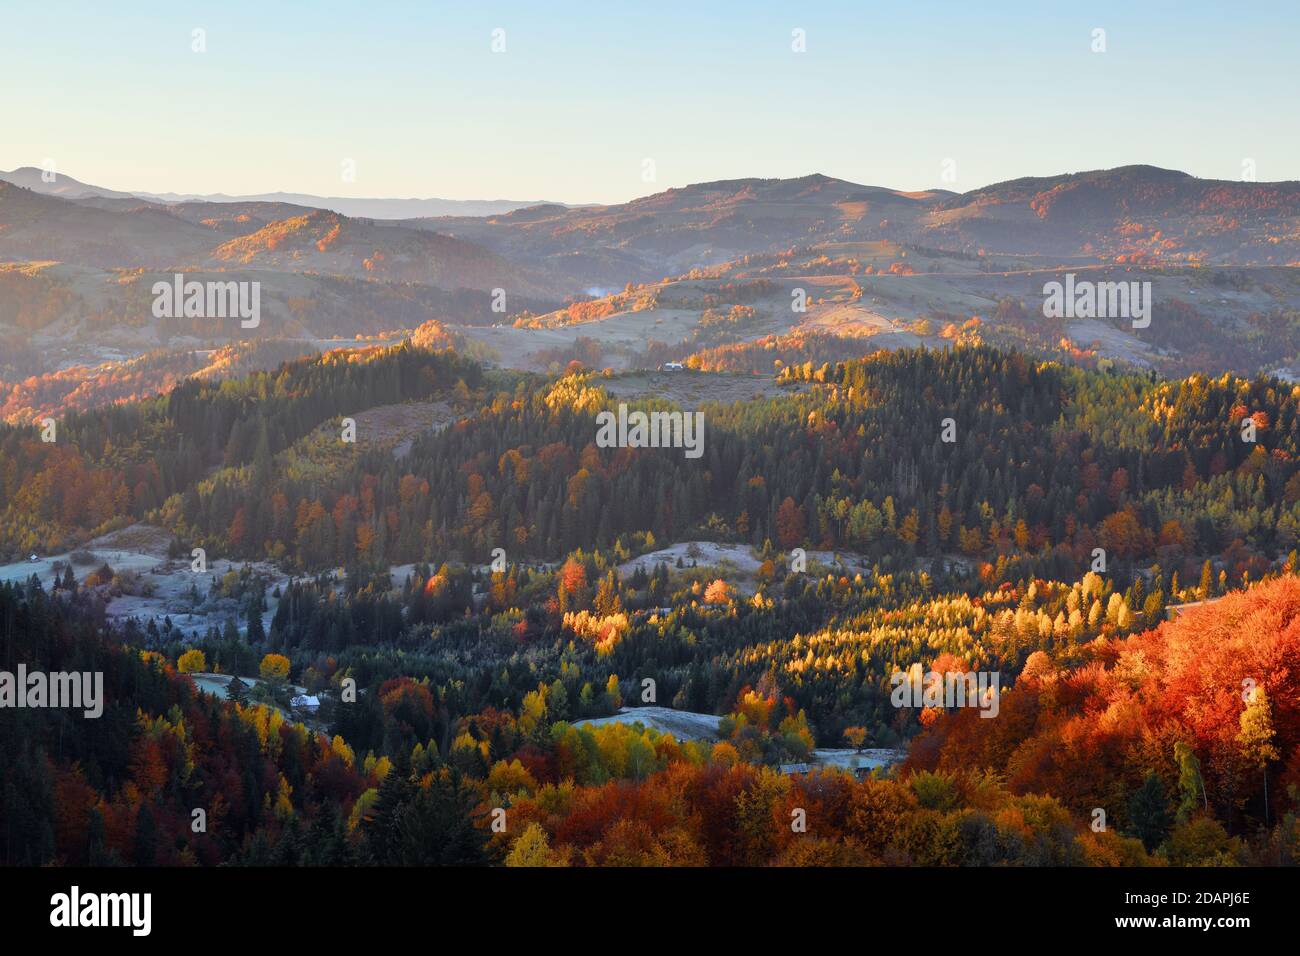 Majestic autumn rural scenery. Landscape with beautiful mountains, fields and forests. There are trees on the lawn full of orange leaves. Picturesque Stock Photo